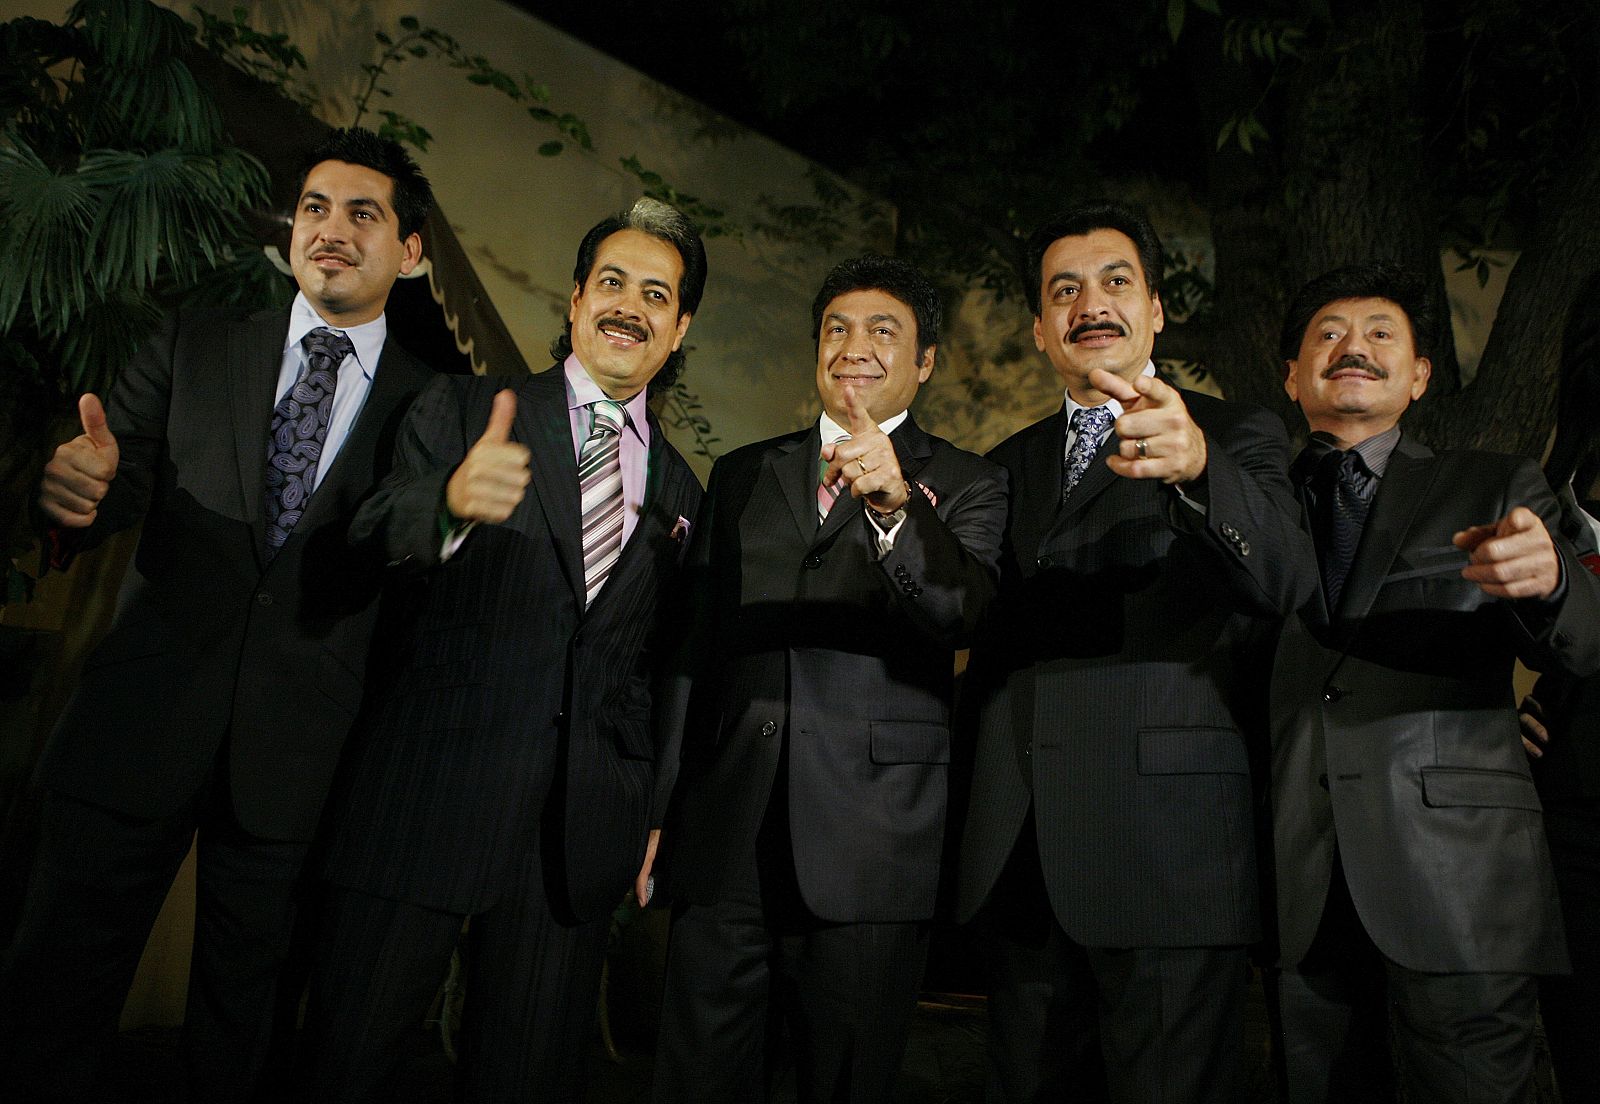 Mexican folk band Los Tigres del Norte pose during a photo opportunity in Monterrey